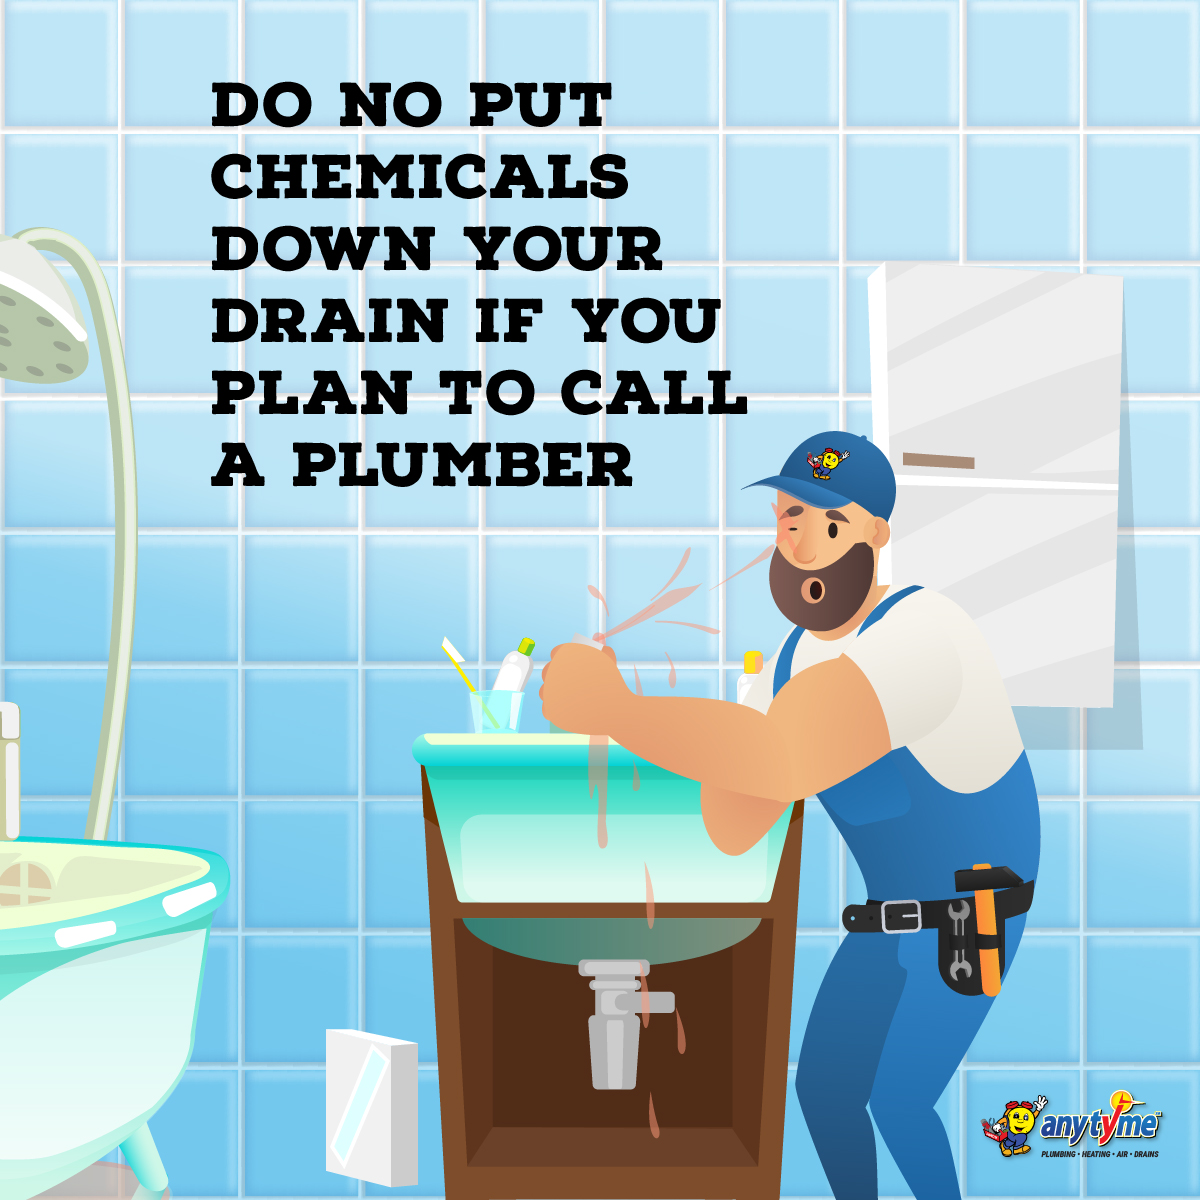 Do no put chemicals down your drain if you plan to call a plumber.
.
.
.
.
.
#1800anytyme #anytyme #drain #chemicals #clog #diy #plumbing #plumber #bathroom #sink #house #home #realestate #sandiego #sandiegocounty #smallbusiness